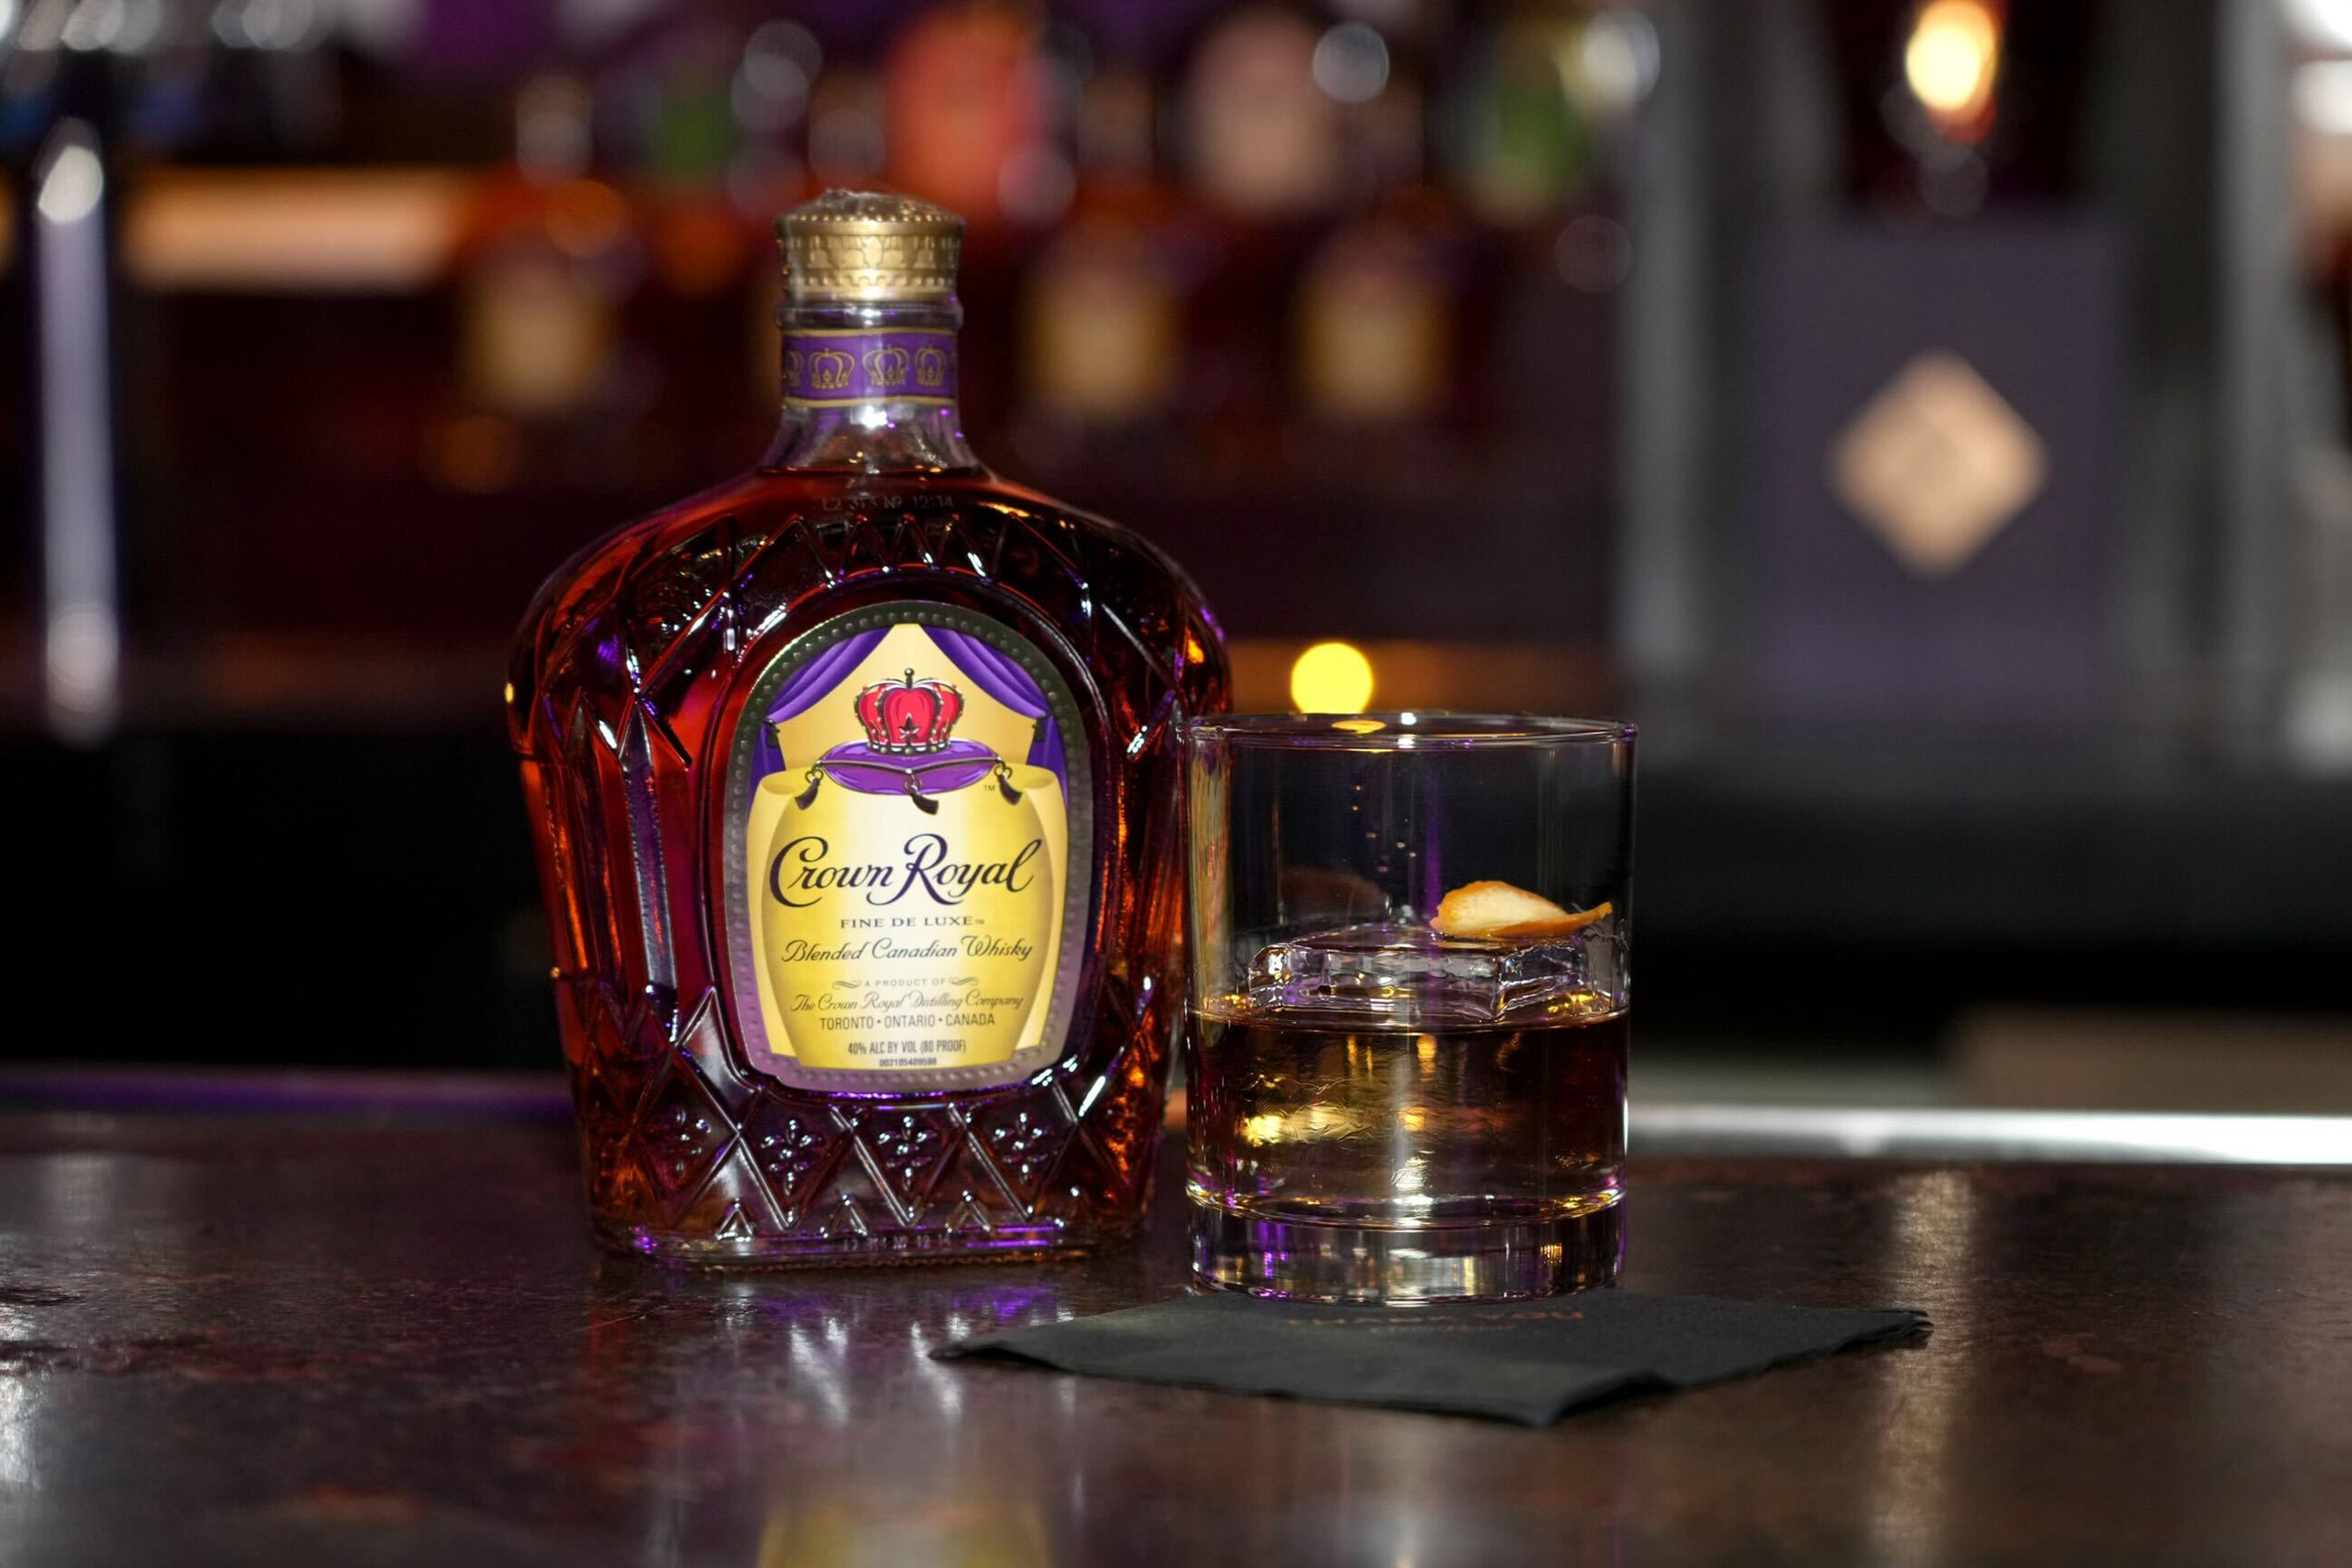 The official whisky sponsor of the NFL, Crown Royal, raised a glass to the veteran community during Super Bowl LVII.